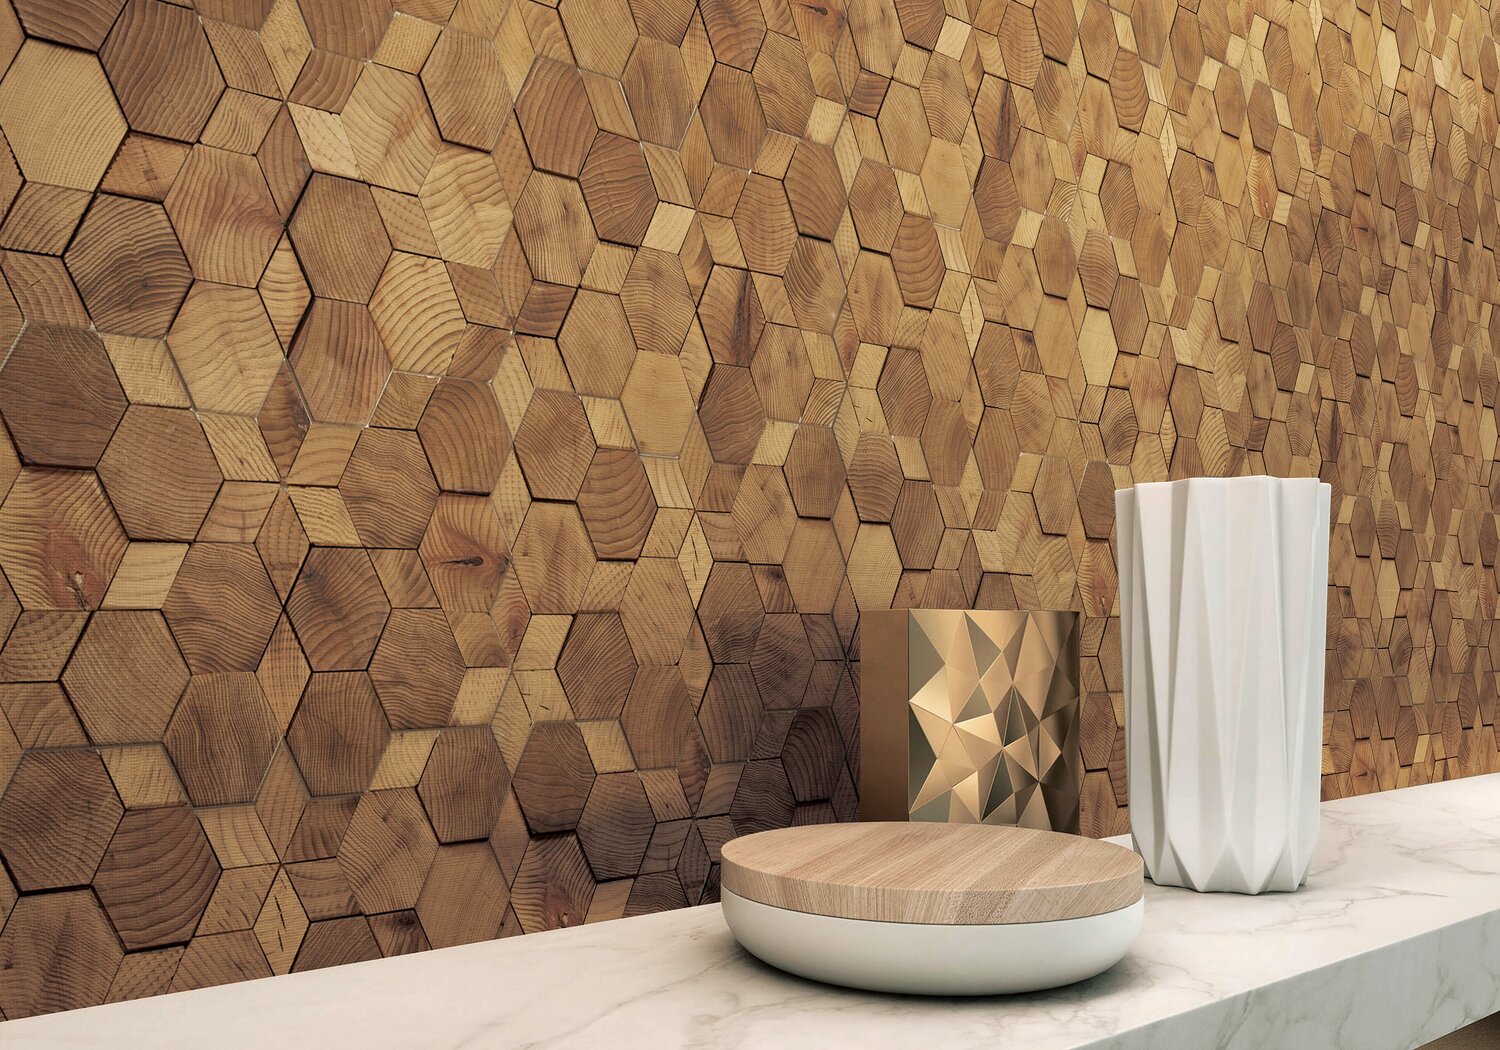 Forest Elements: Wood Mosaic Tiles with a Touch of Nature